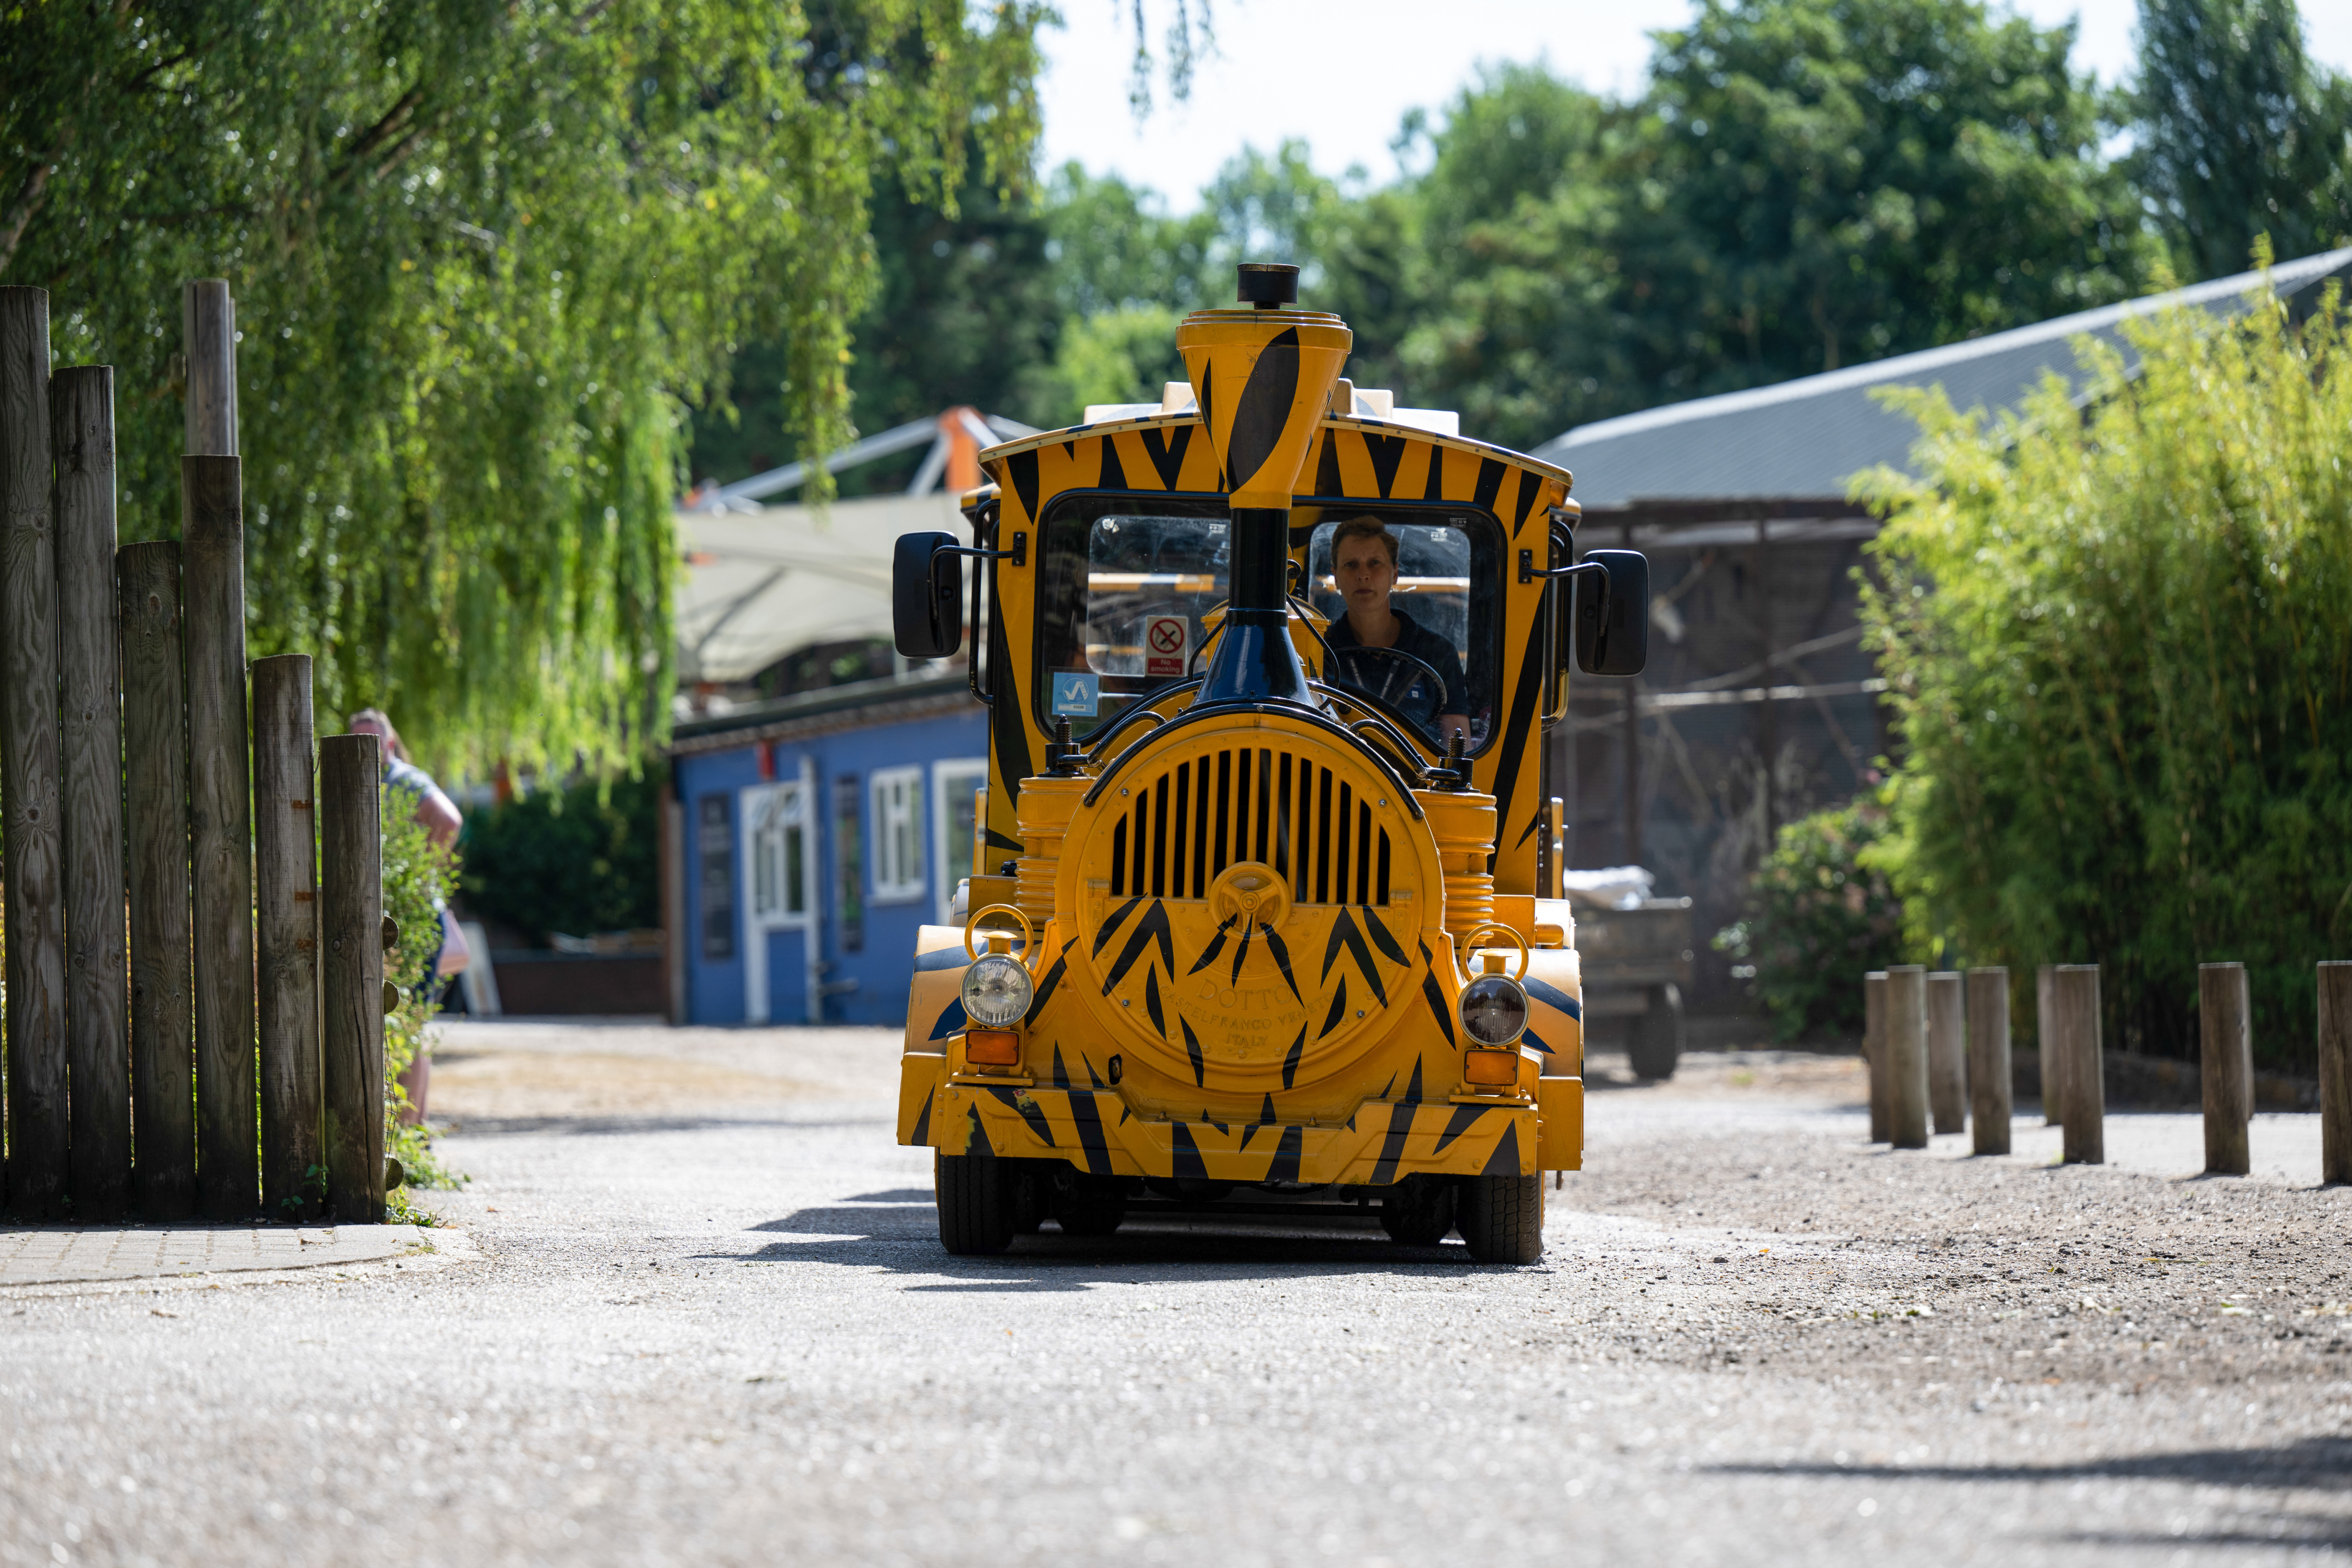 Discover Banham Zoo | Everything it has to offer at a discount price